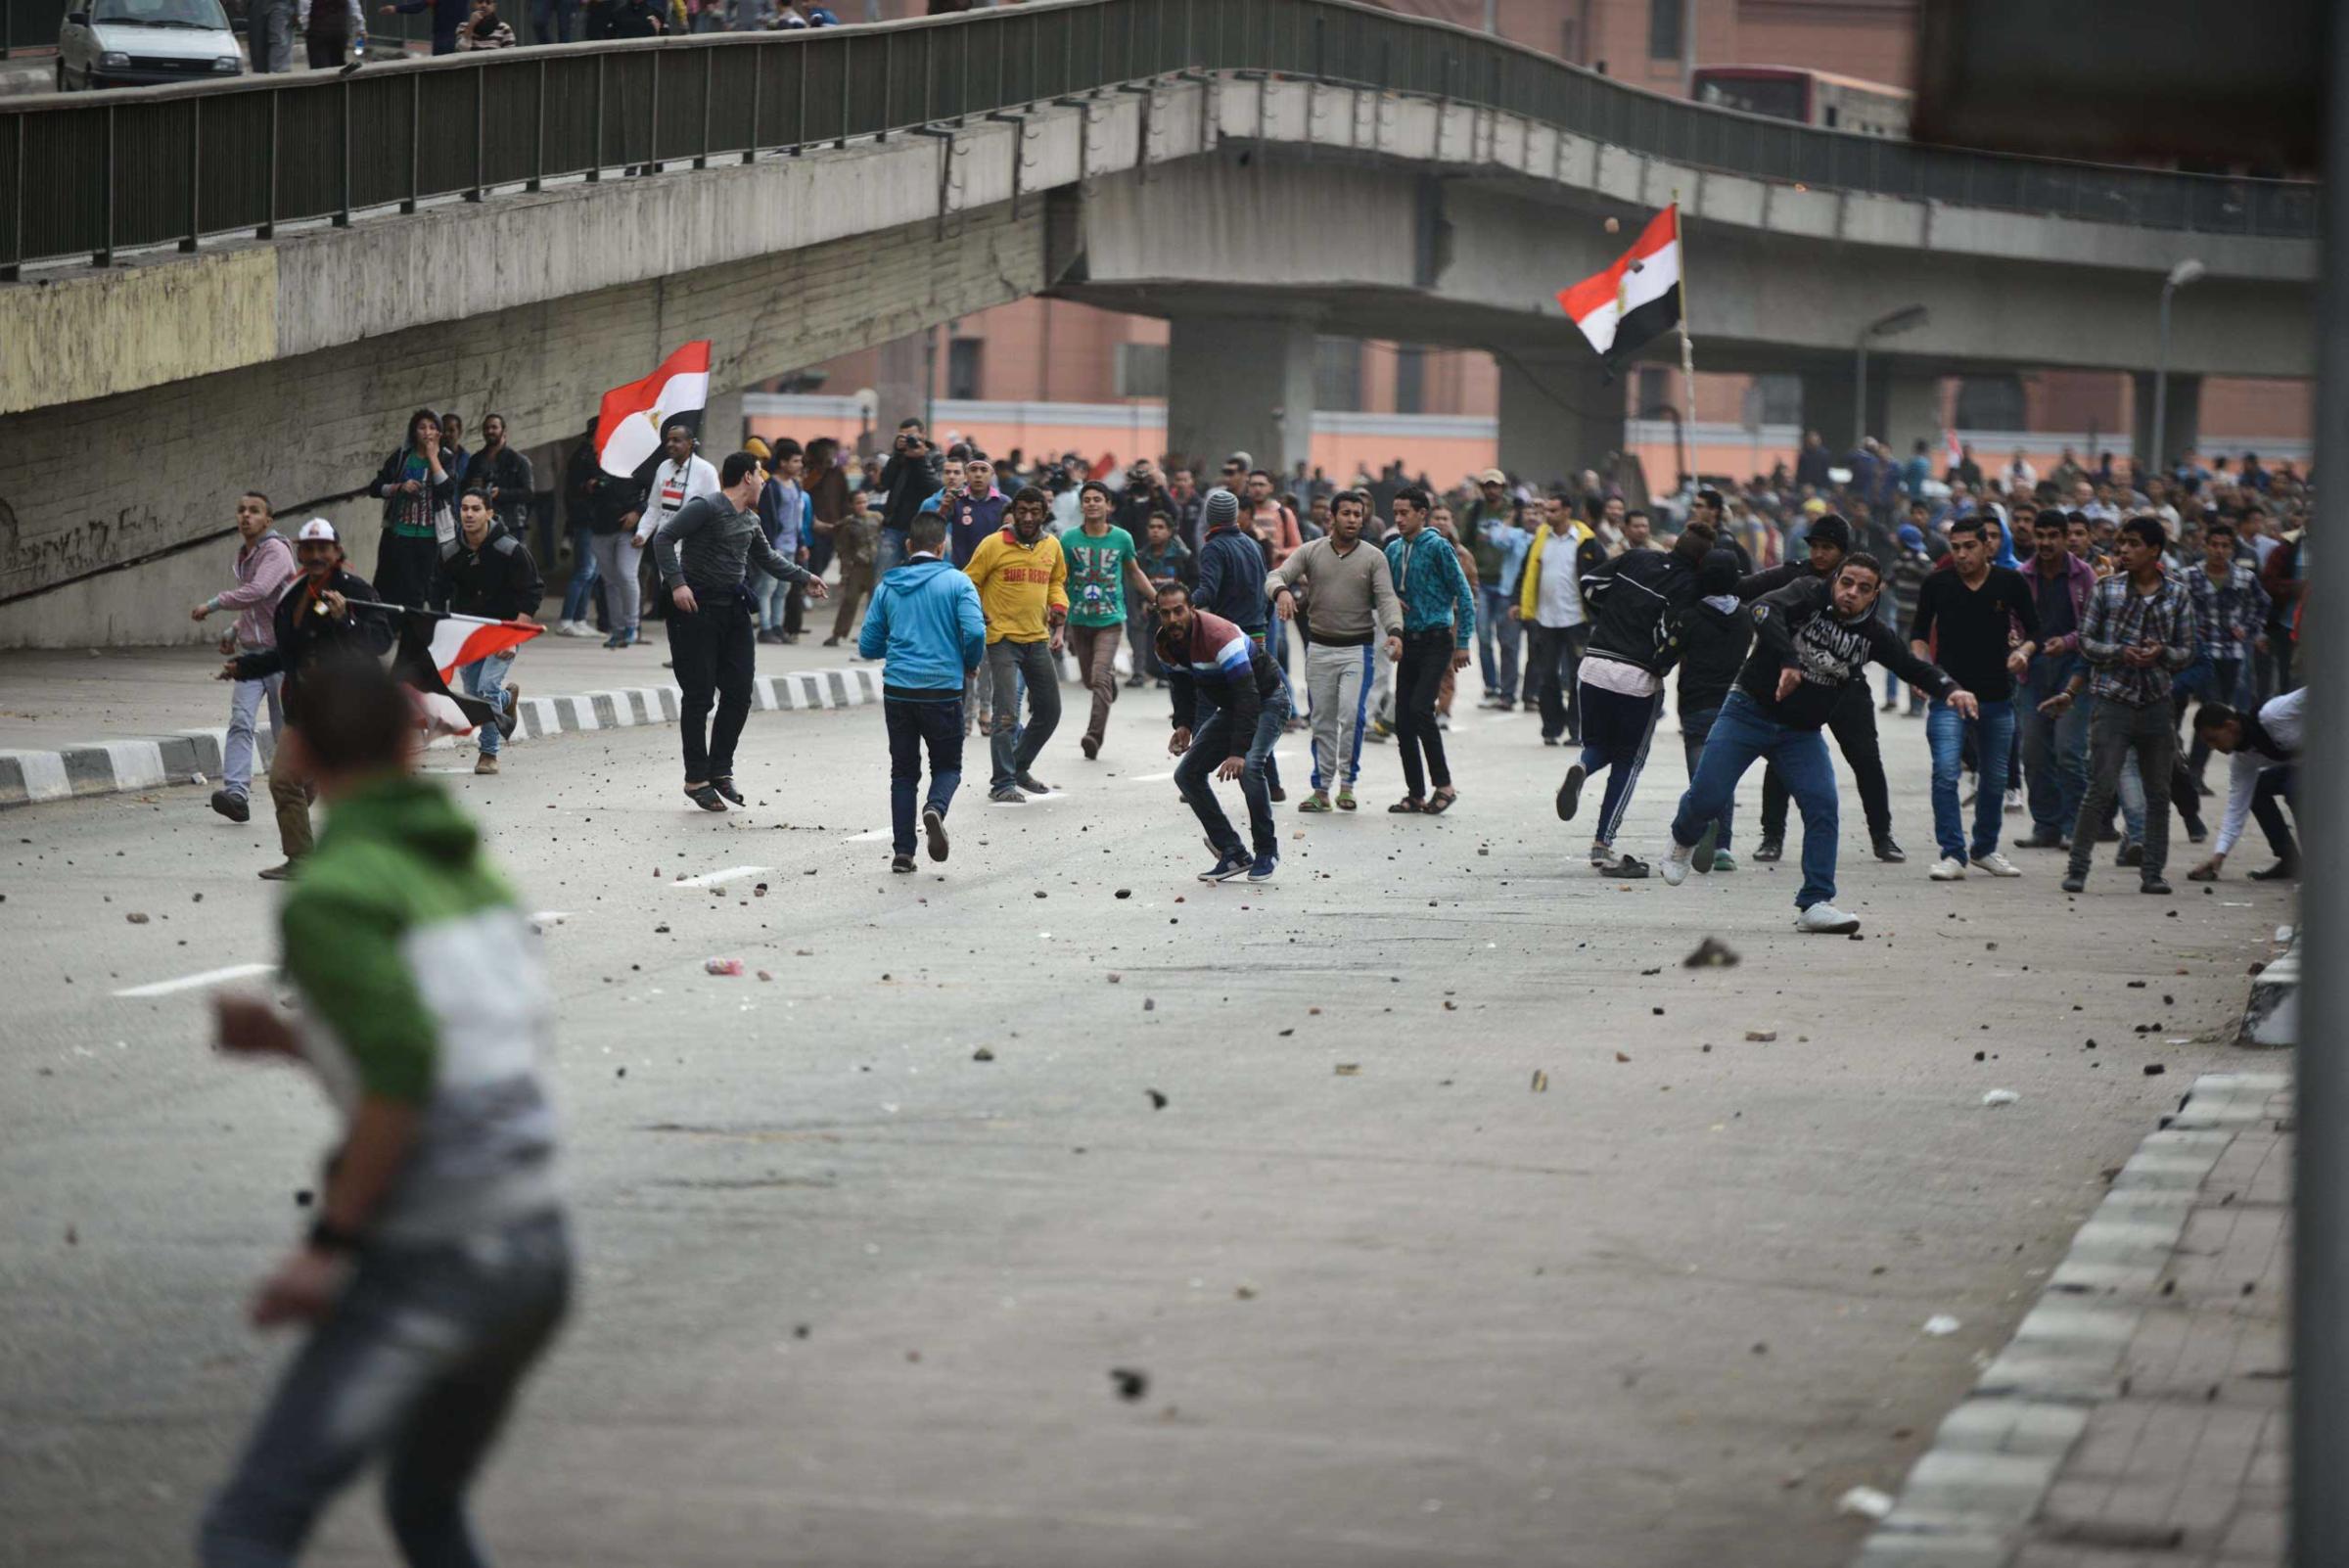 Supporters of President Abdul Fattah al-Sisi clash with anti-government protesters following demonstrations in Cairo on Jan. 25, 2015.